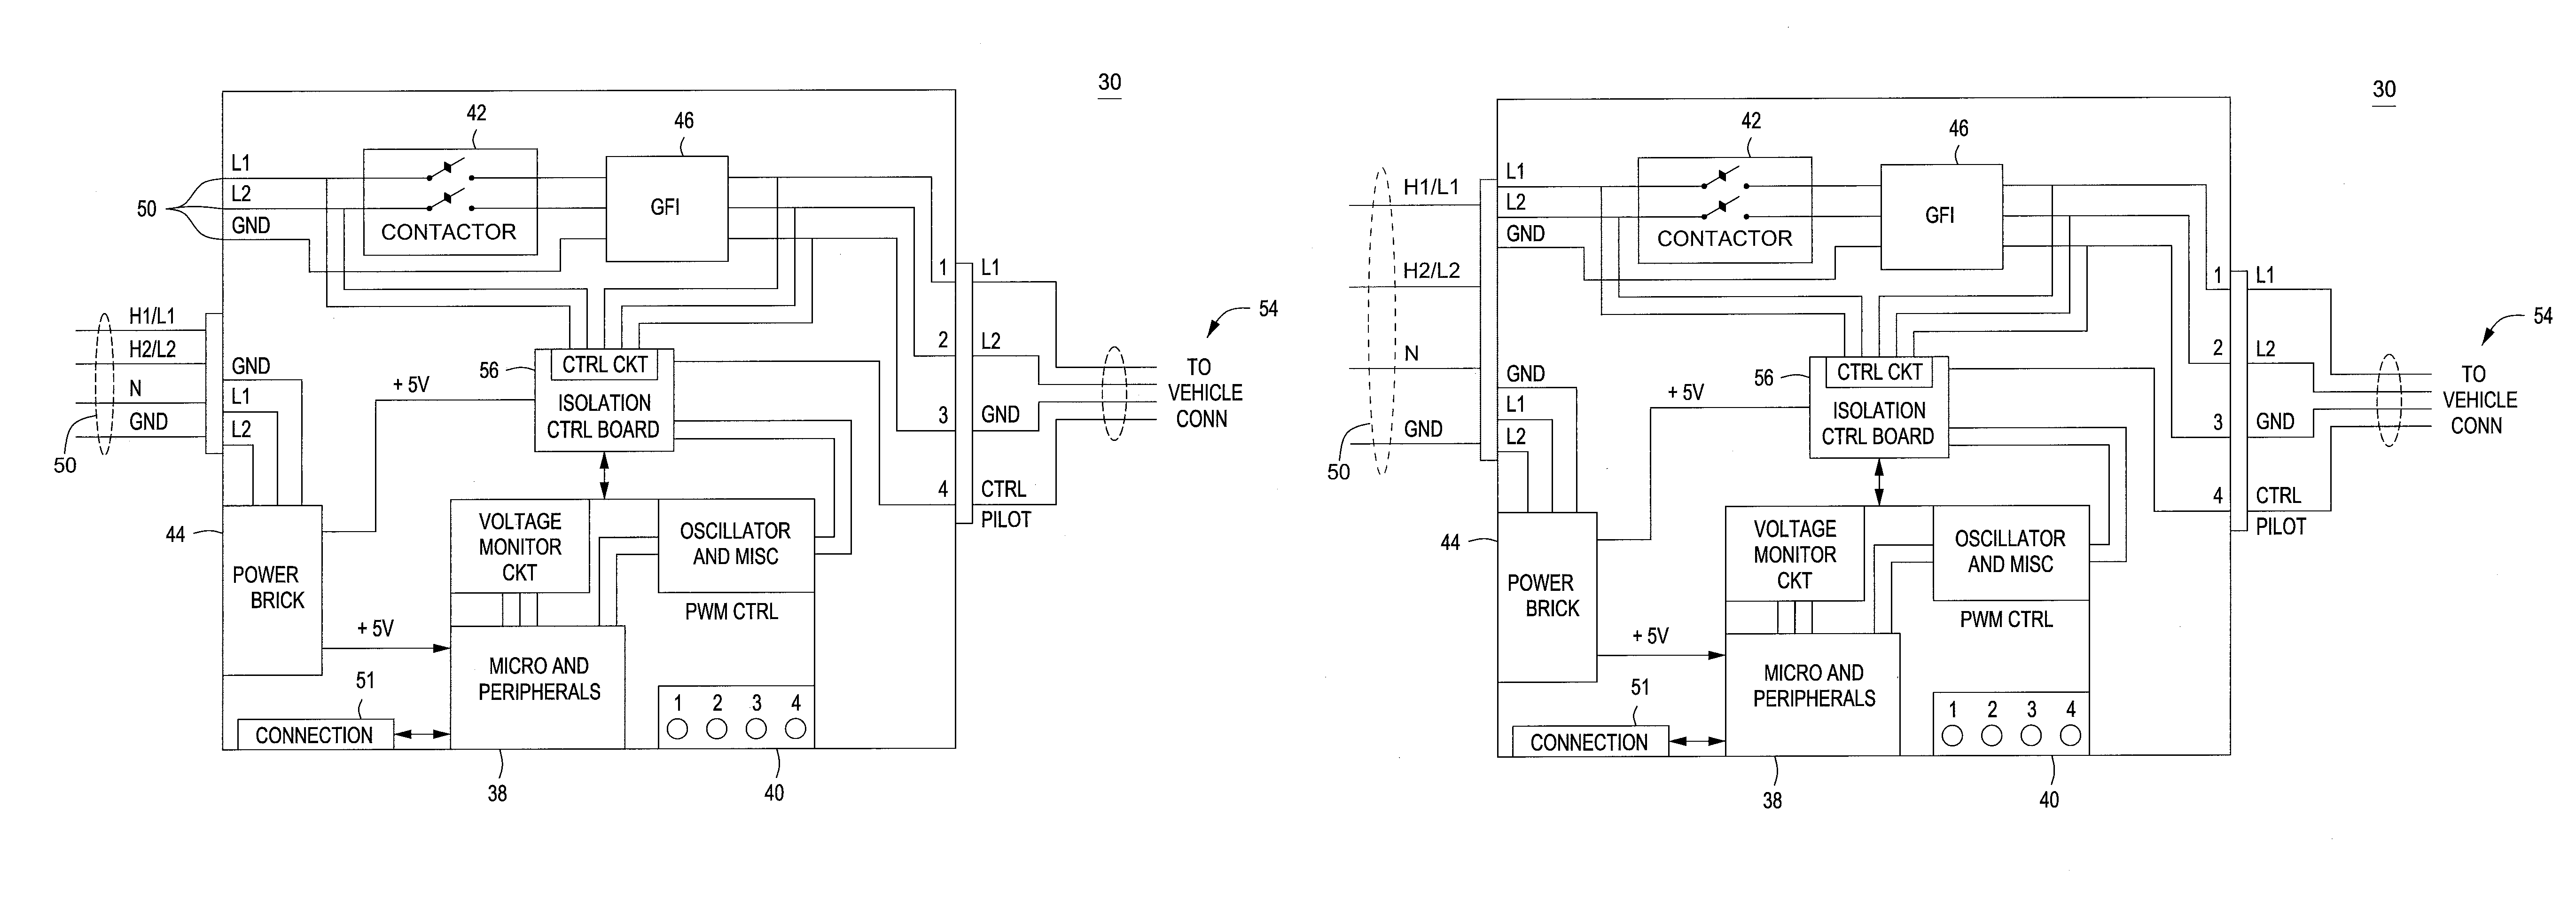 Electric vehicle supply equipment having a socket and a method of charging an electric vehicle